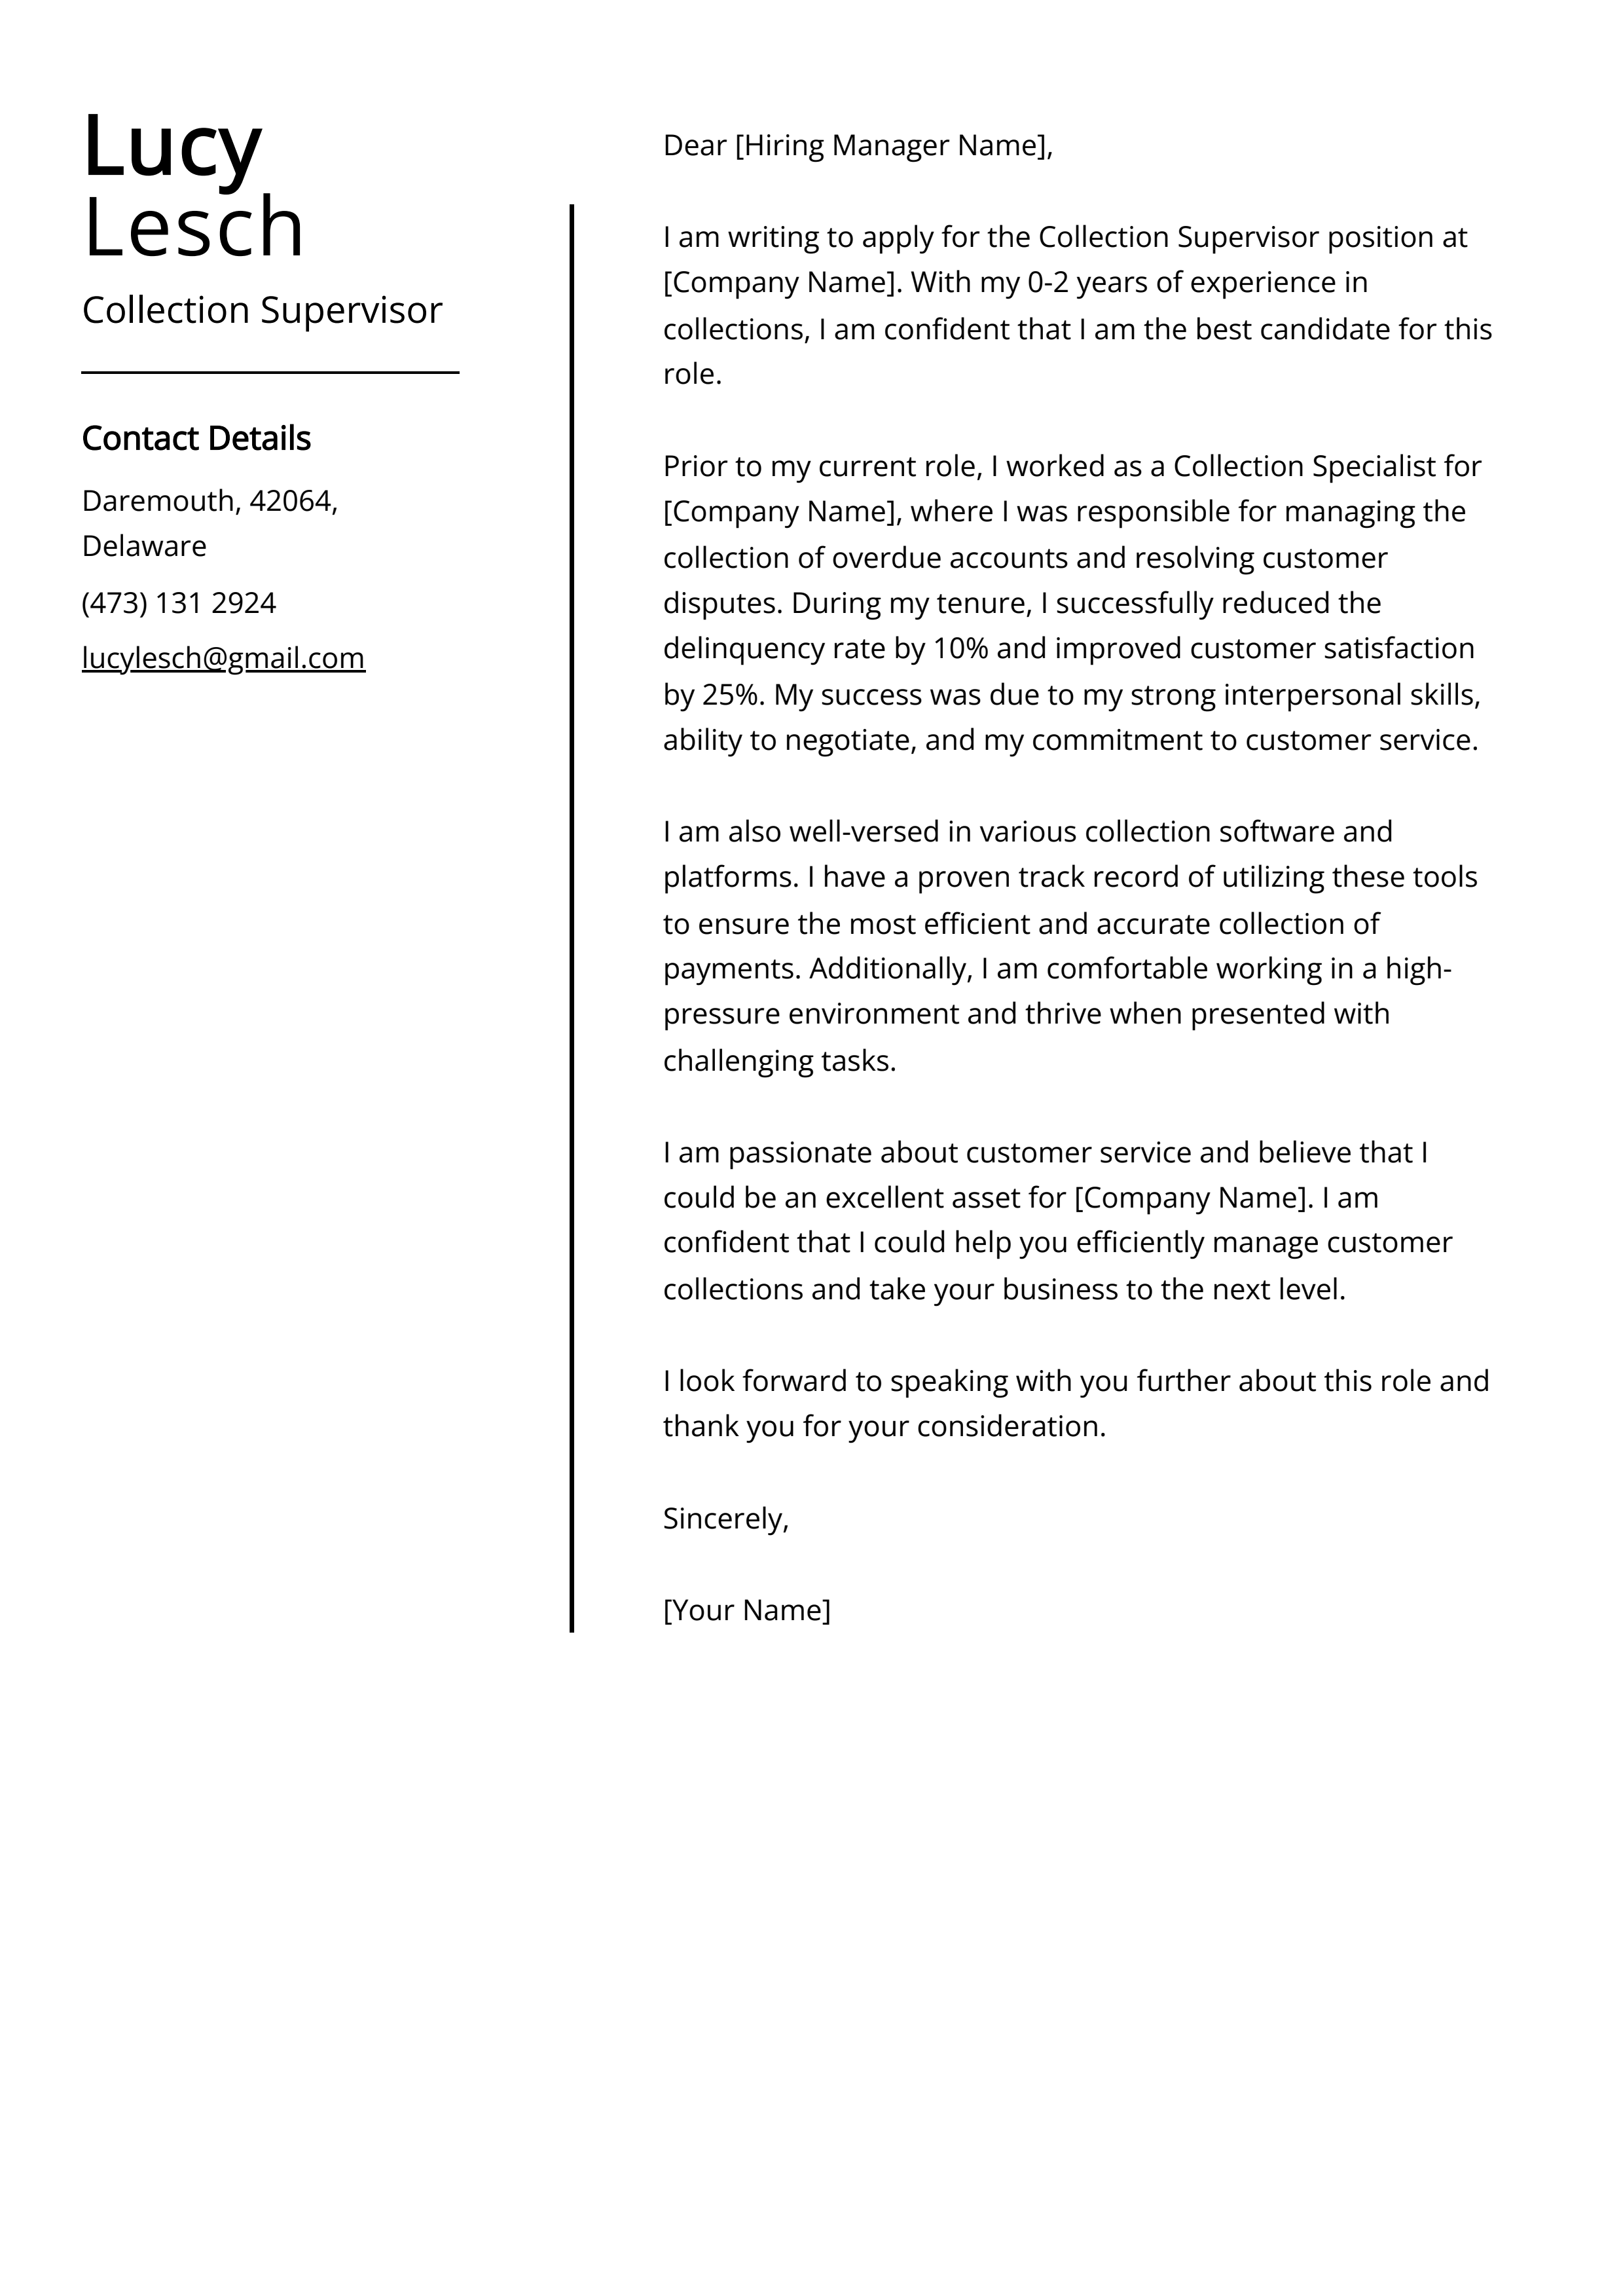 Collection Supervisor Cover Letter Example